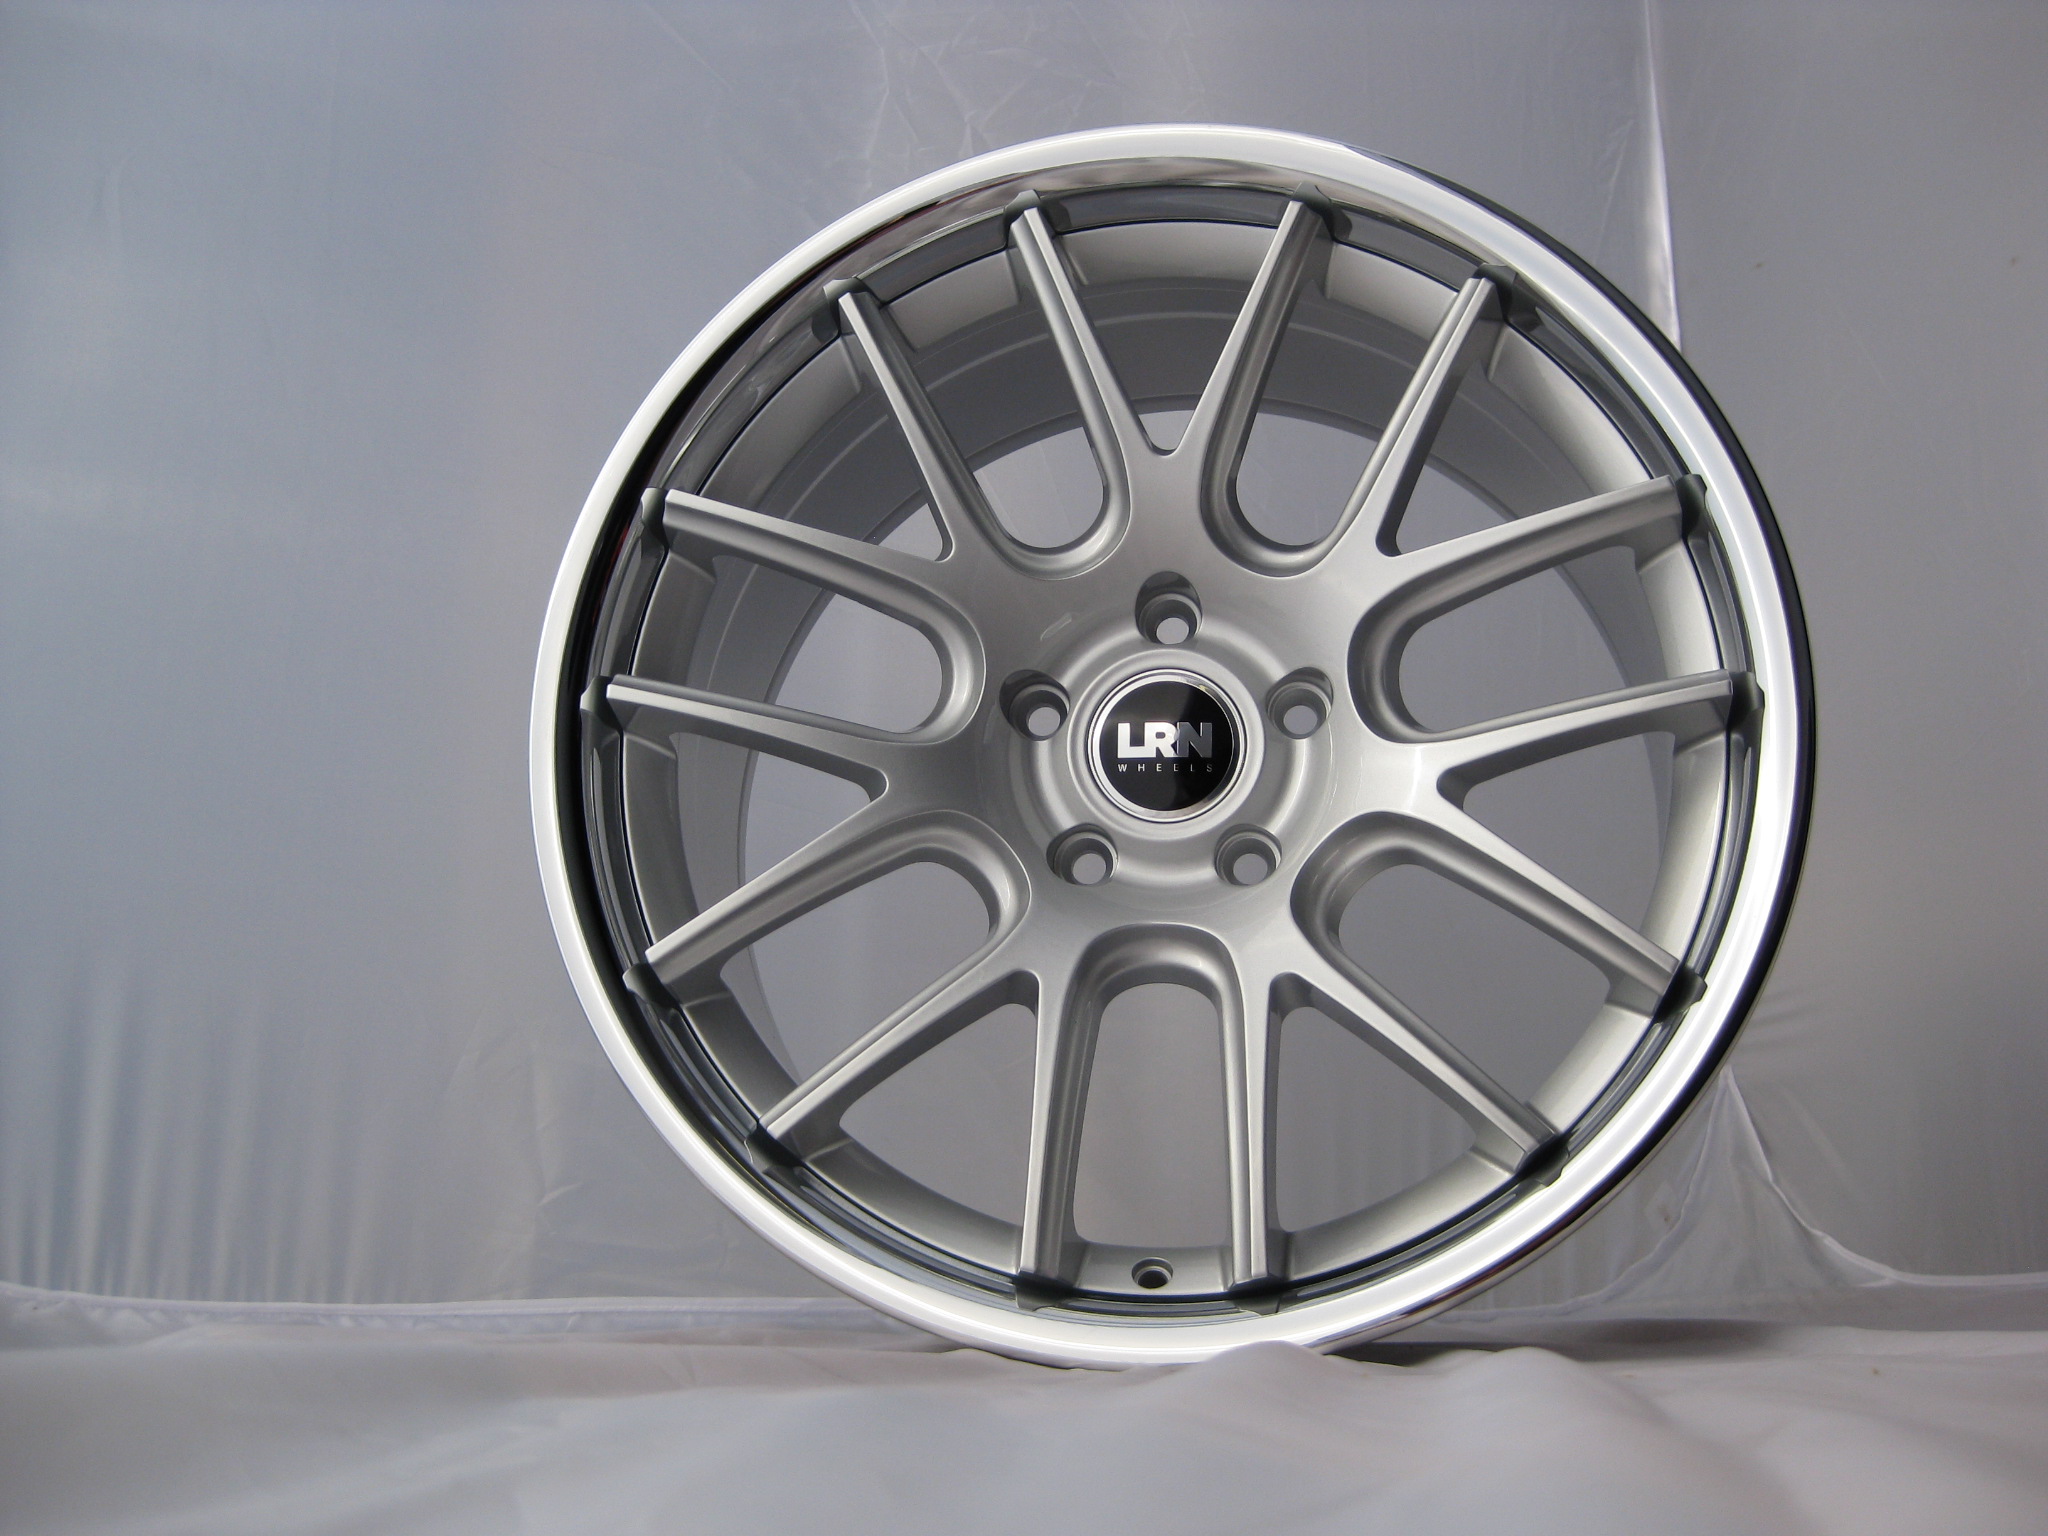 NEW 19  LRN VECTOR ALLOY WHEELS IN SILVER WITH INOX DISH  MASSIVE 10  WIDE REAR S WITH DEEP CONCAVE